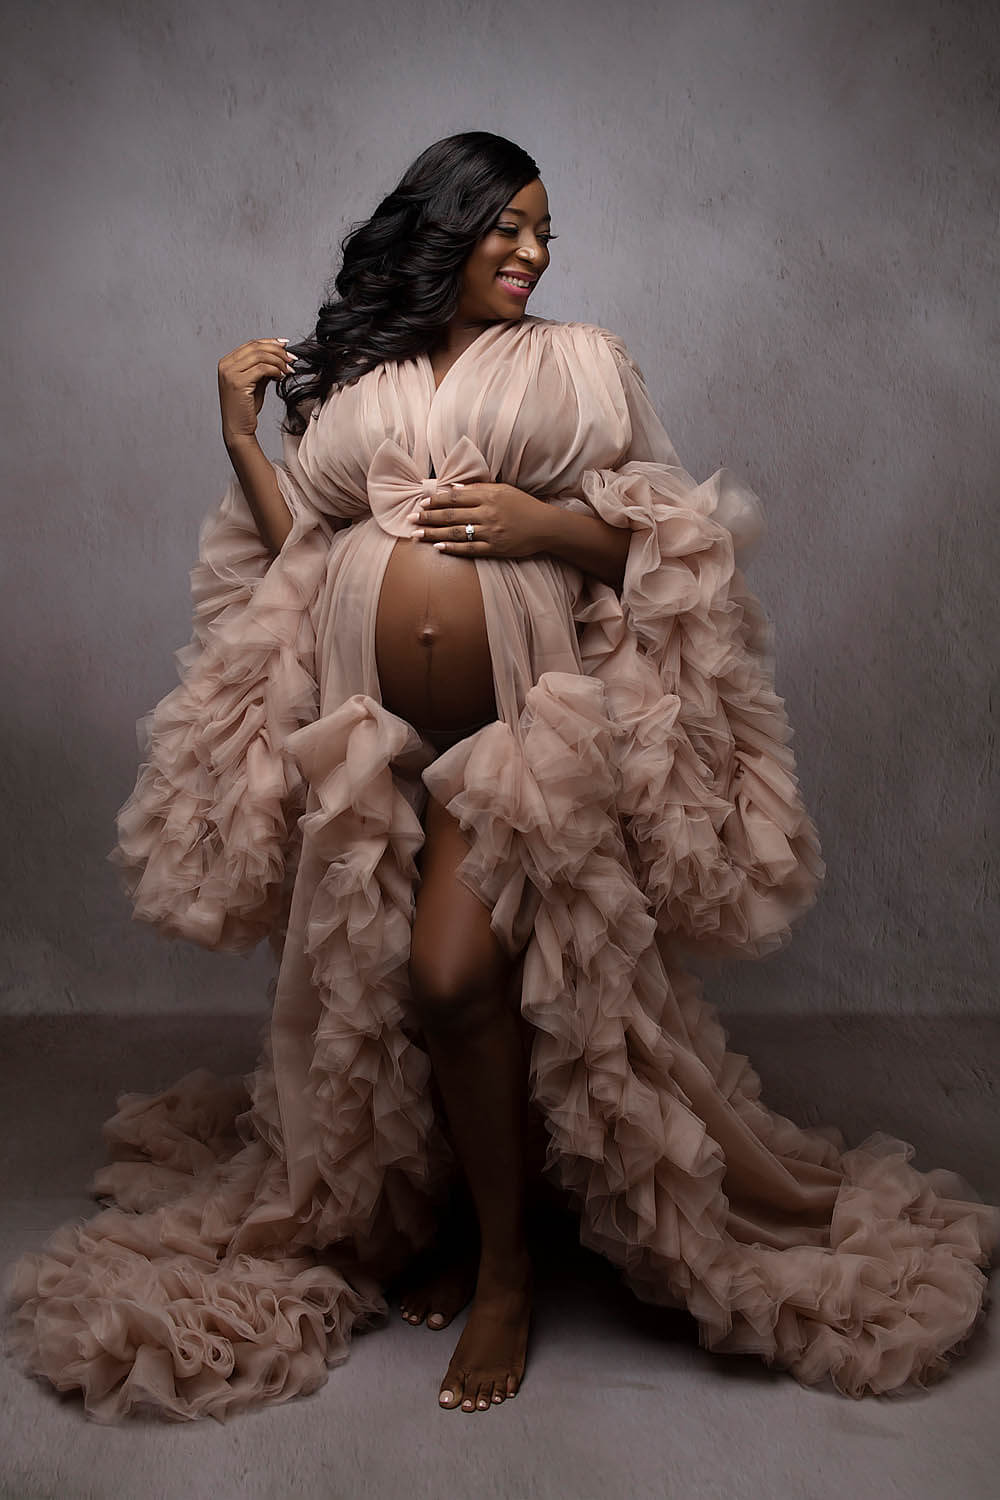 black woman wearing robe for maternity photoshoot showing her belly at a newborn photography studio in south florida near davie fl